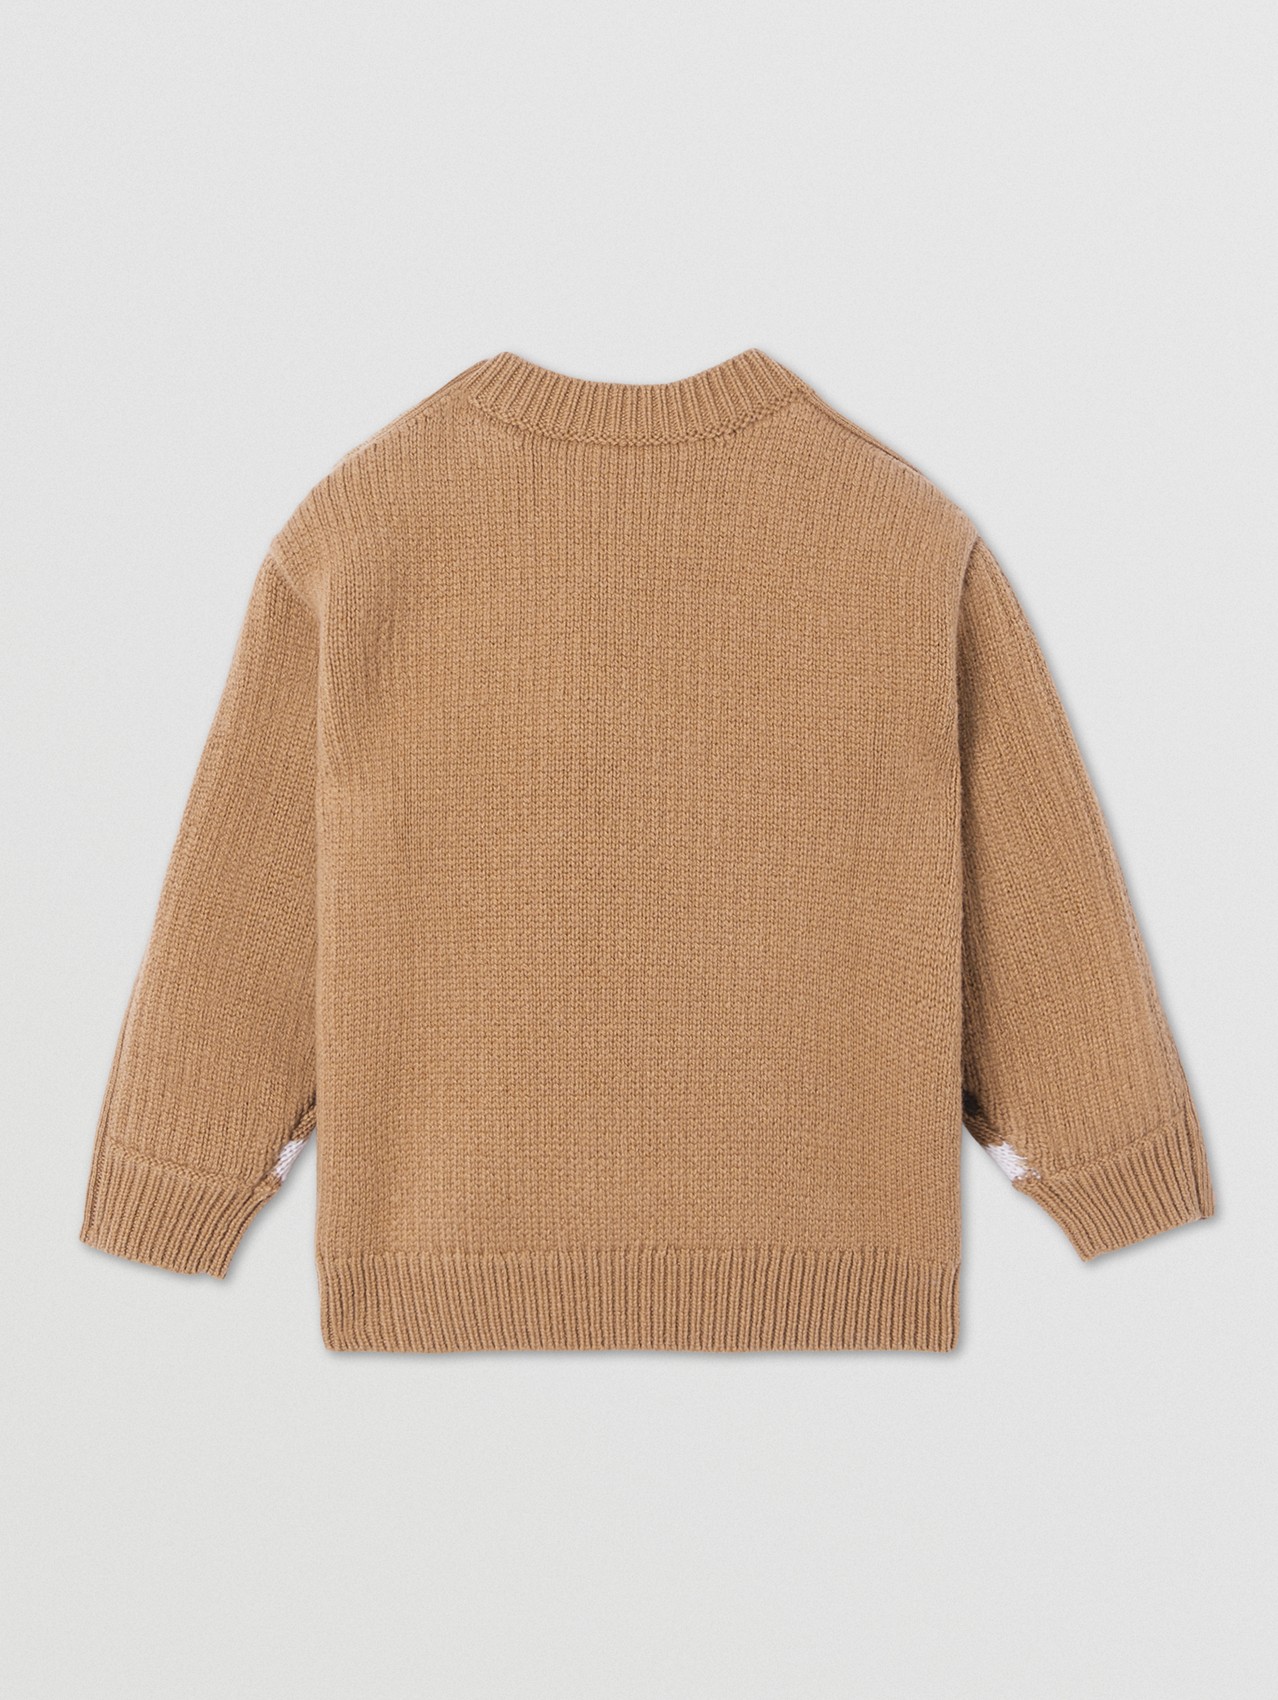 Fair Isle Wool Cashmere Sweater in Camel